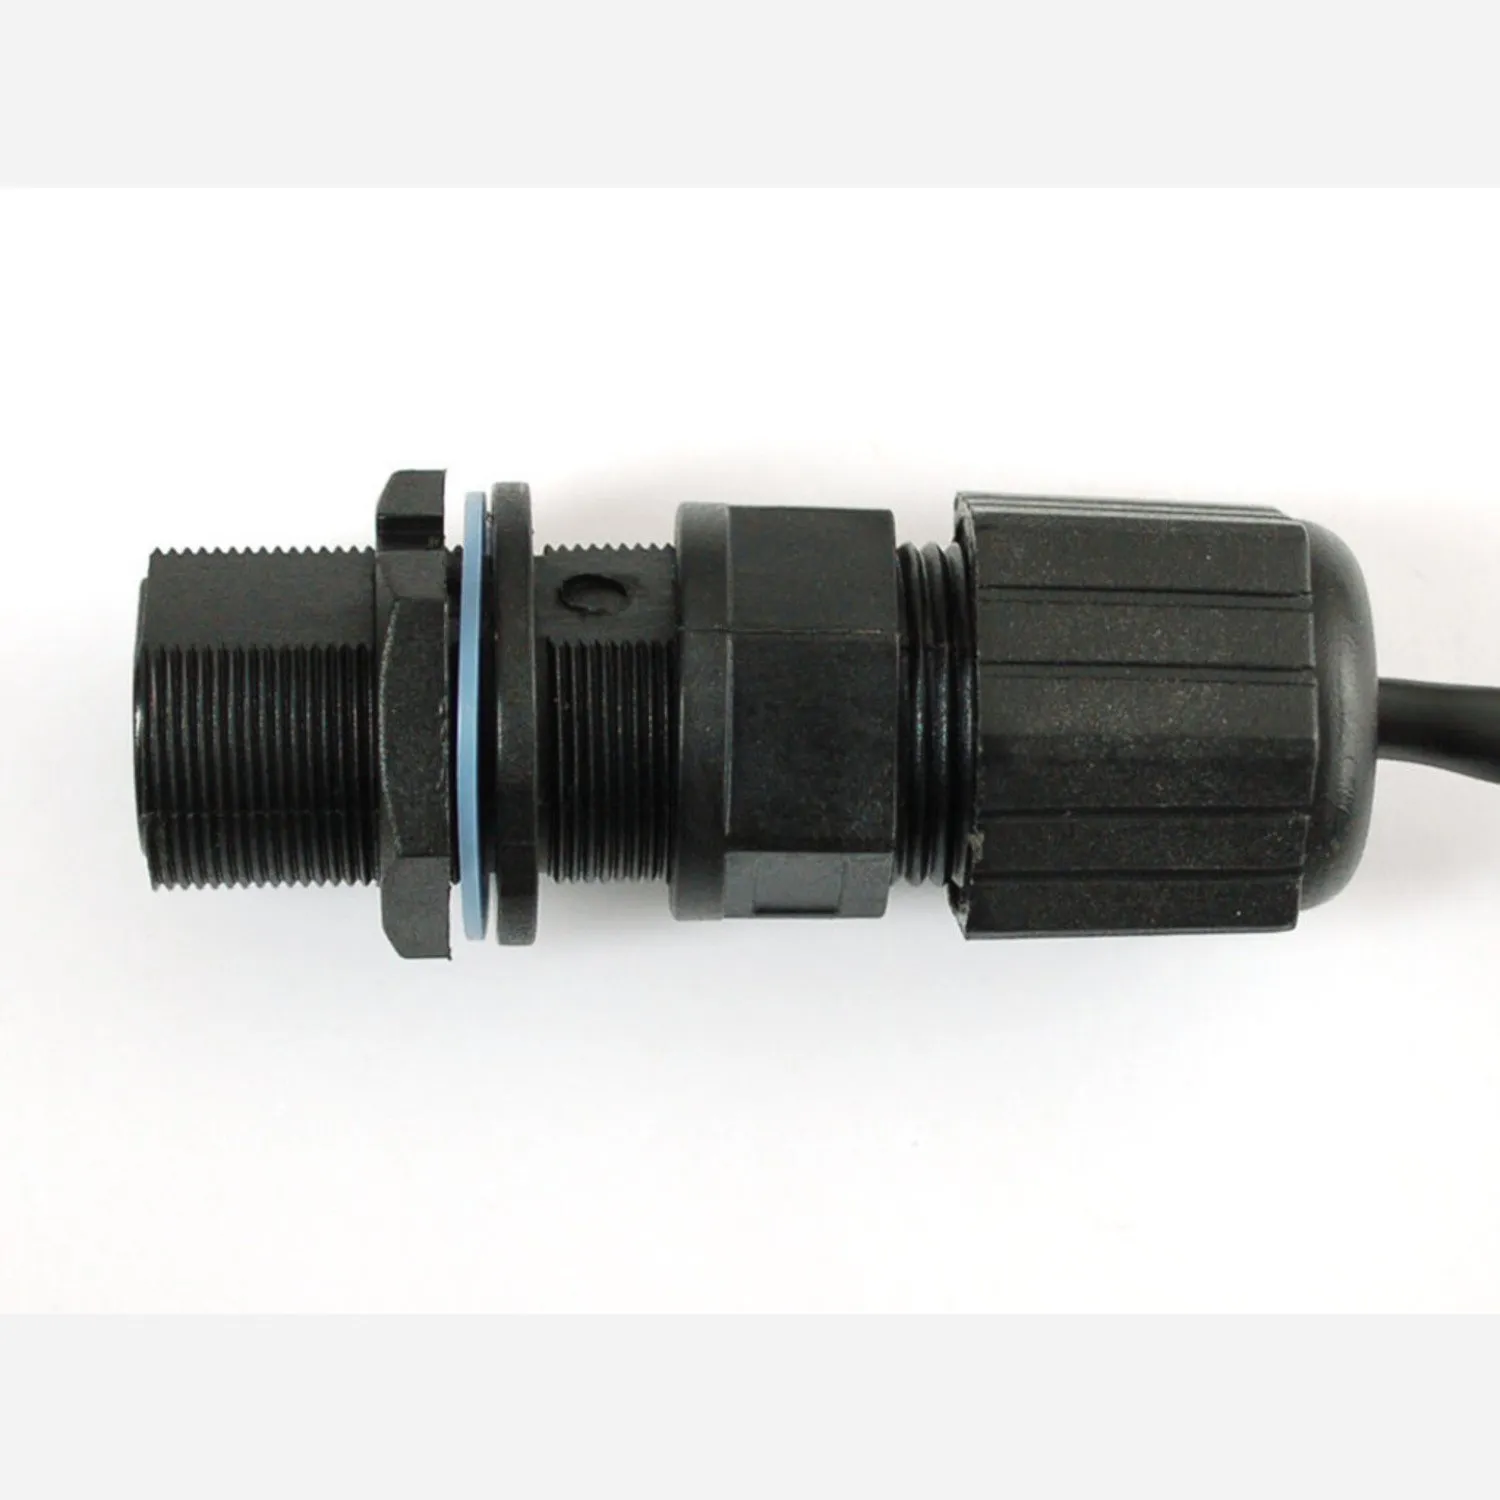 Photo of Cable Gland - Waterproof RJ-45 / Ethernet connector [RJ-45]